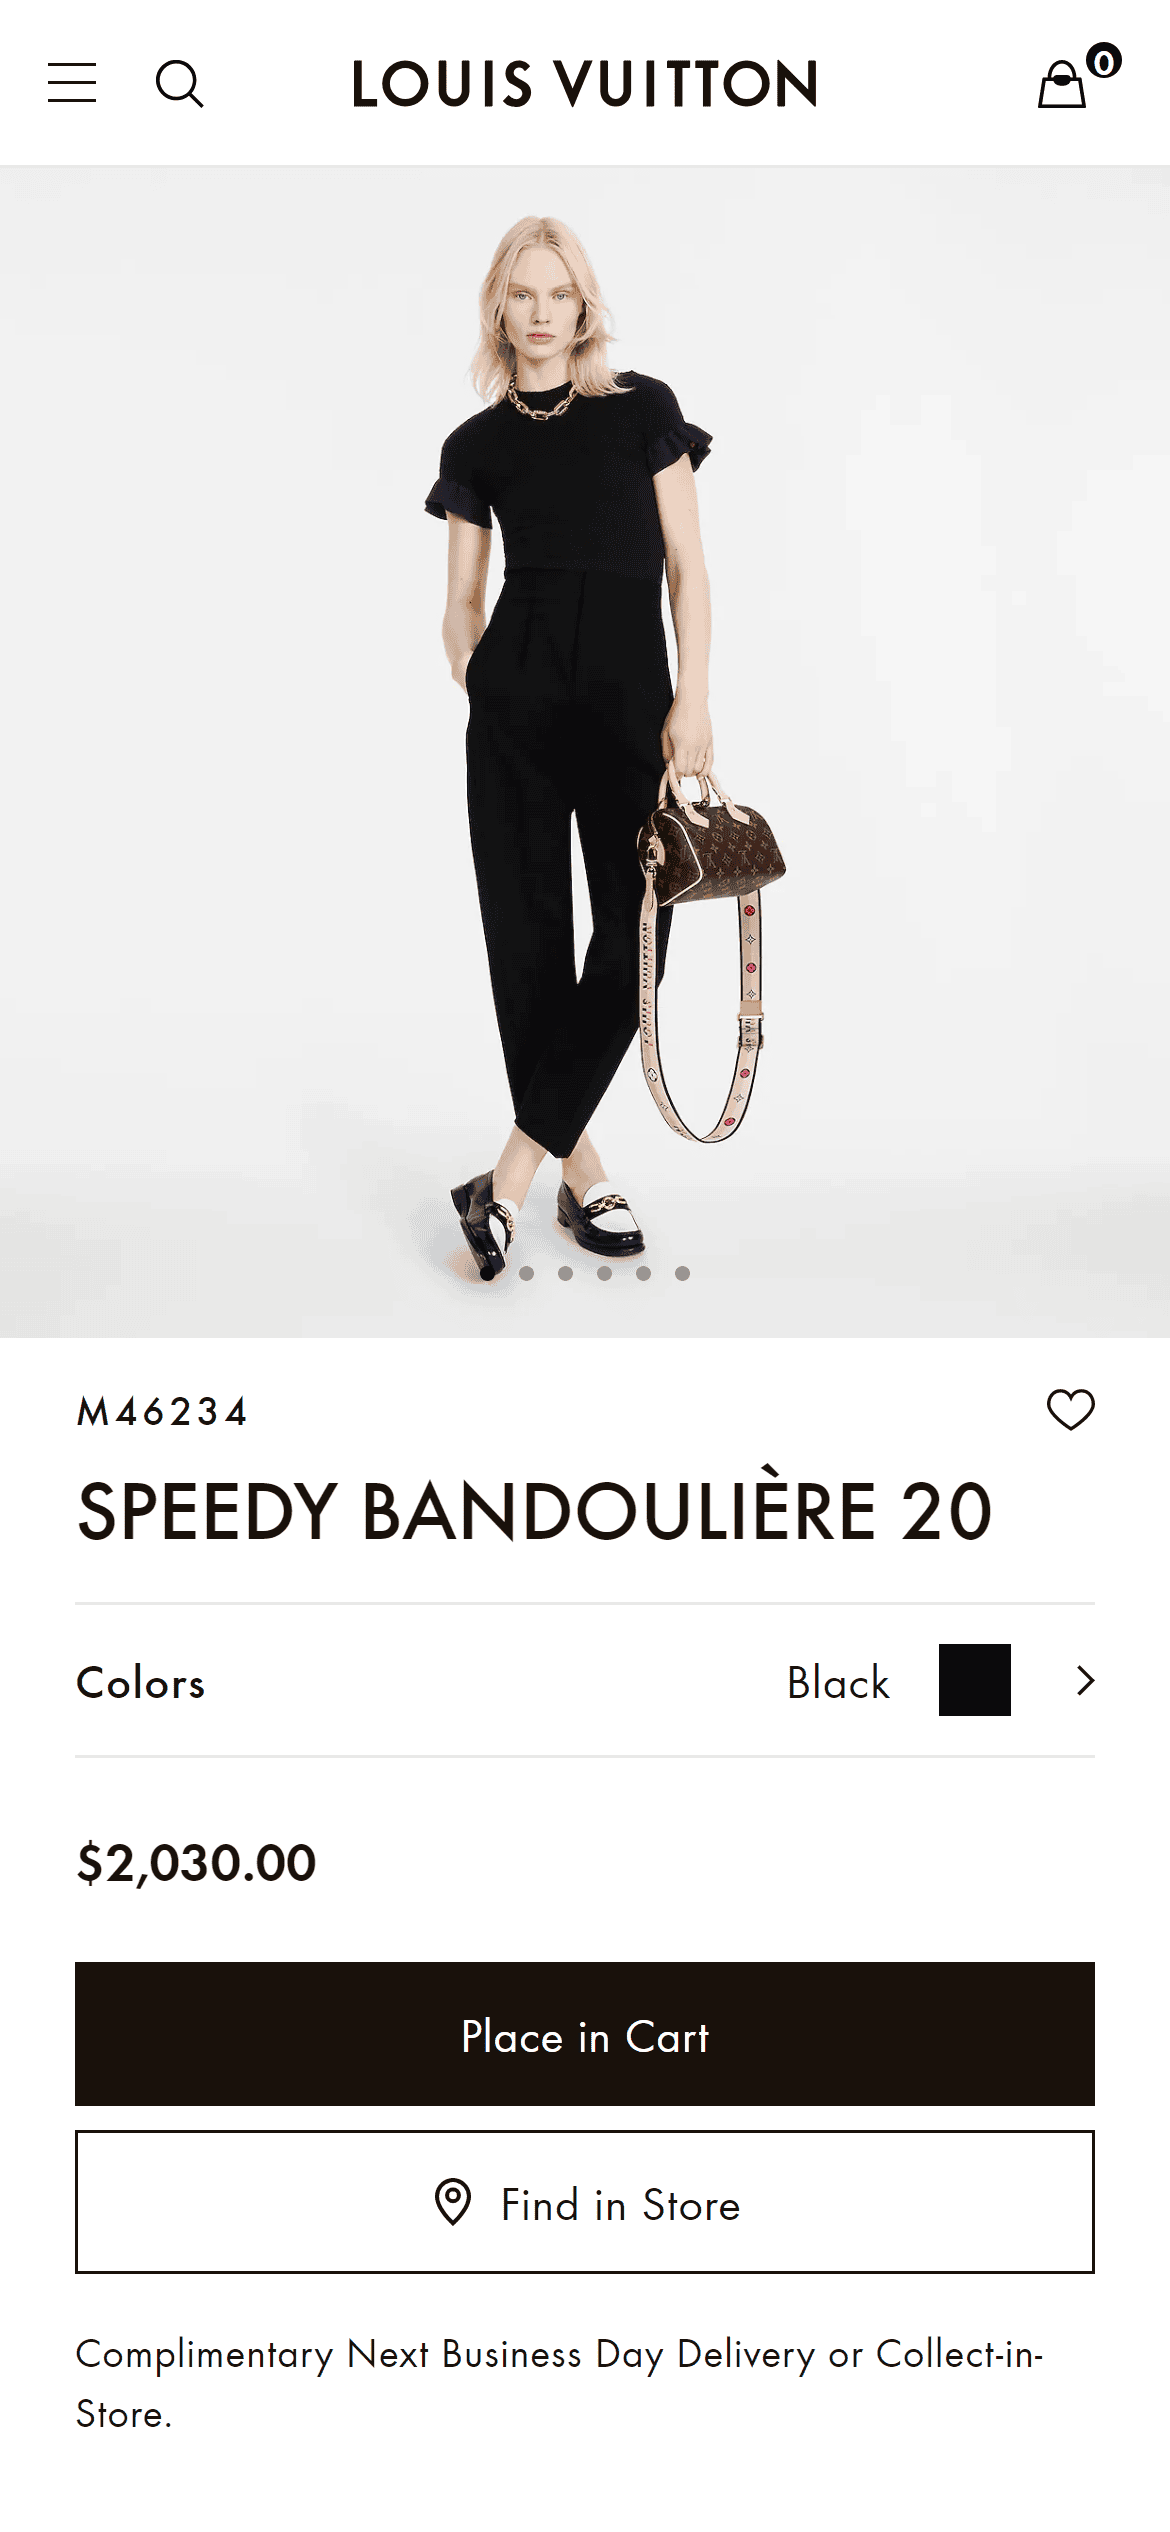 us.louisvuitton.com_eng-us_products_speedy-bandouliere-20-monogram-nvprod3190095v_M46234iPhone-12-Pro.png